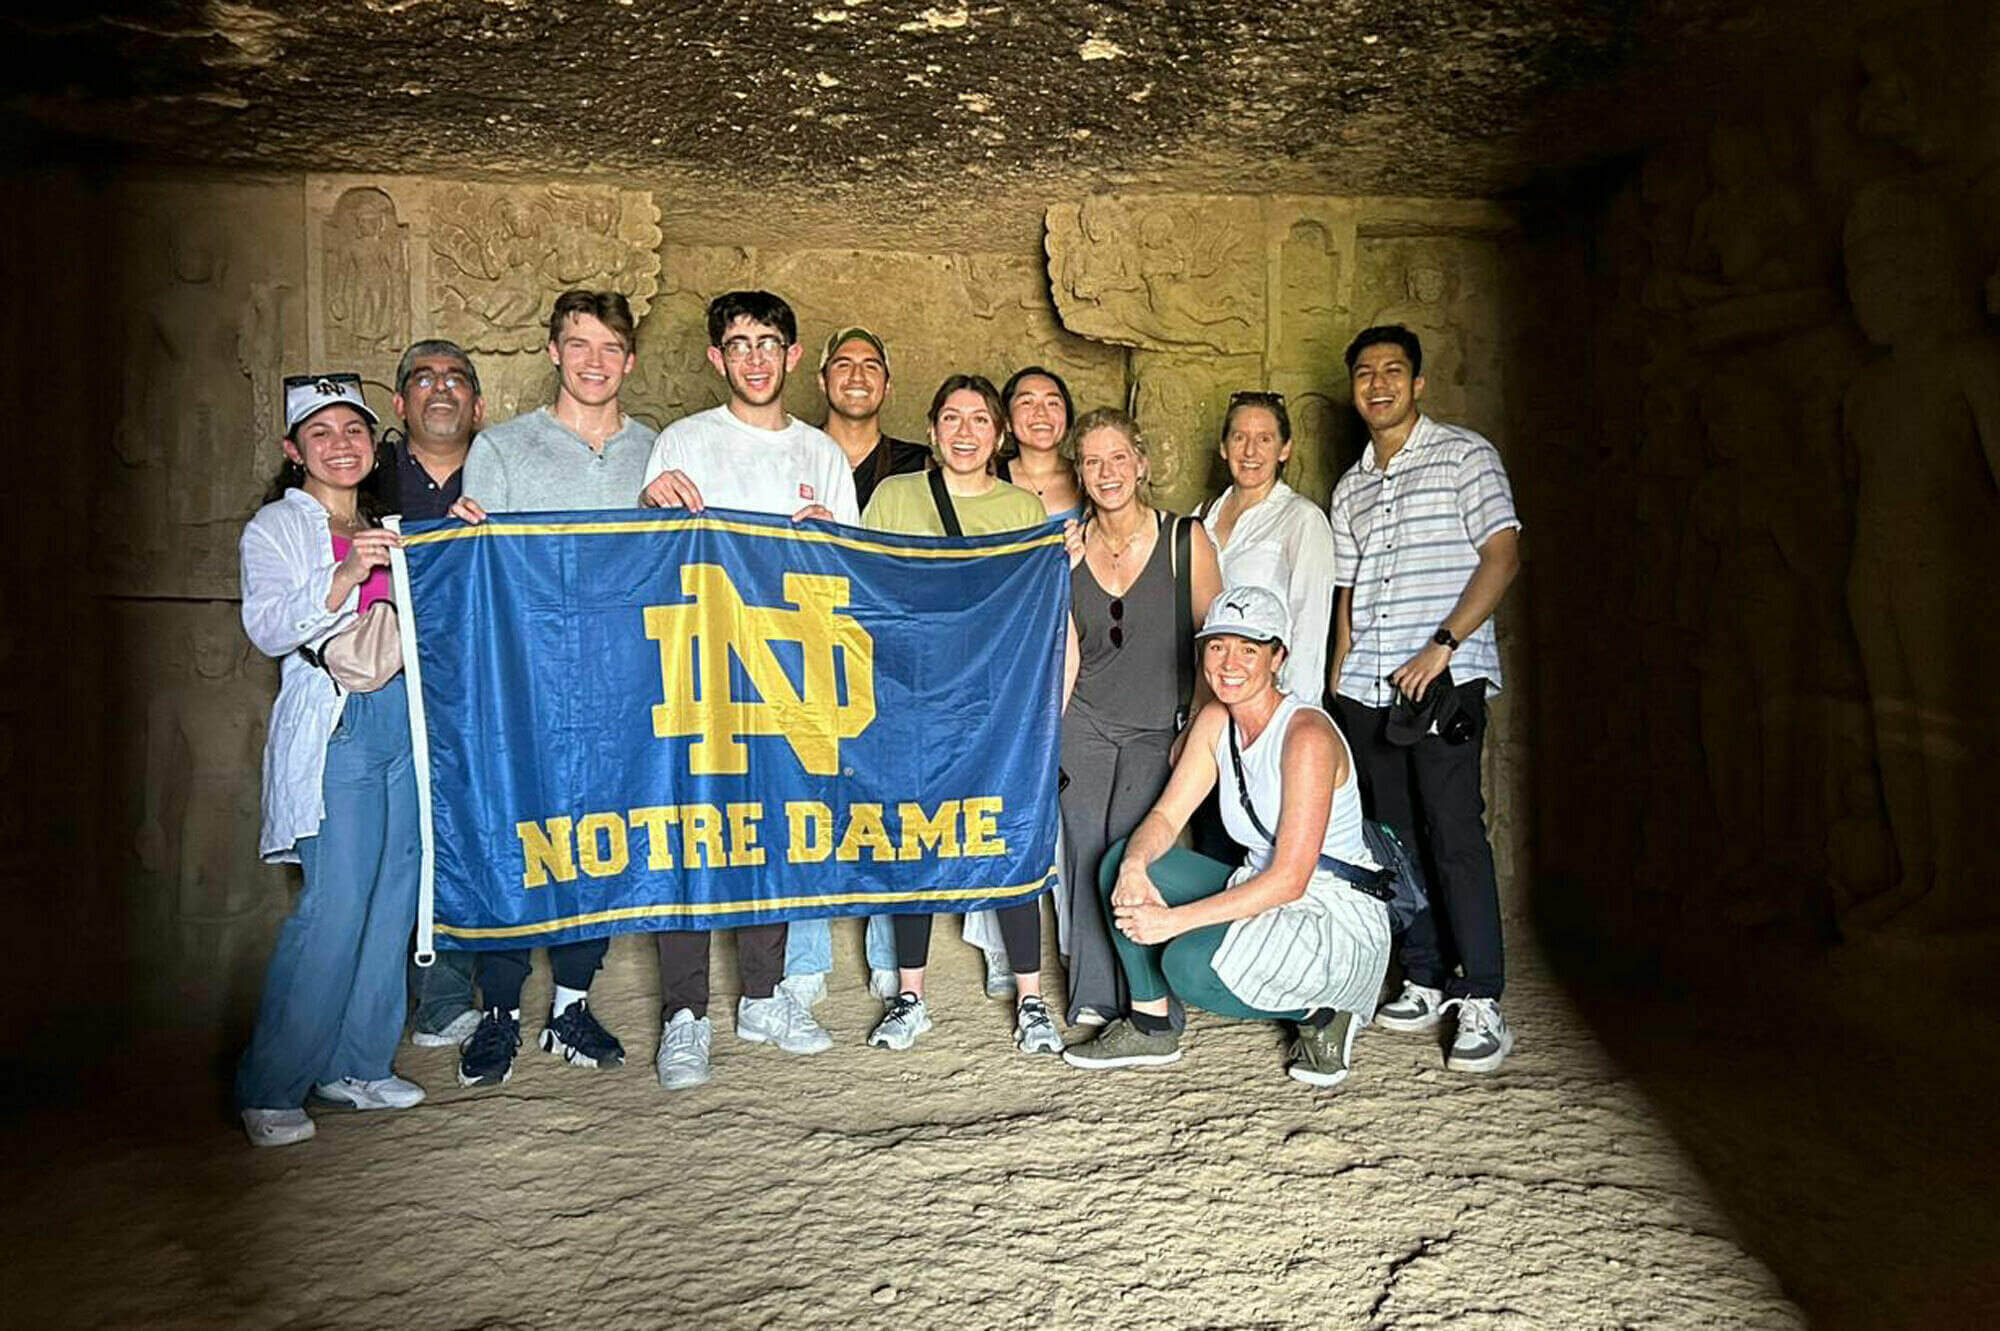 Repping ND at the top! The Notre Dame India Summer group braved the Mumbai heat, trekking through Sanjay Gandhi National Park to the 2400-year-old Kanheri Caves. Epic view from inside the highest cave.